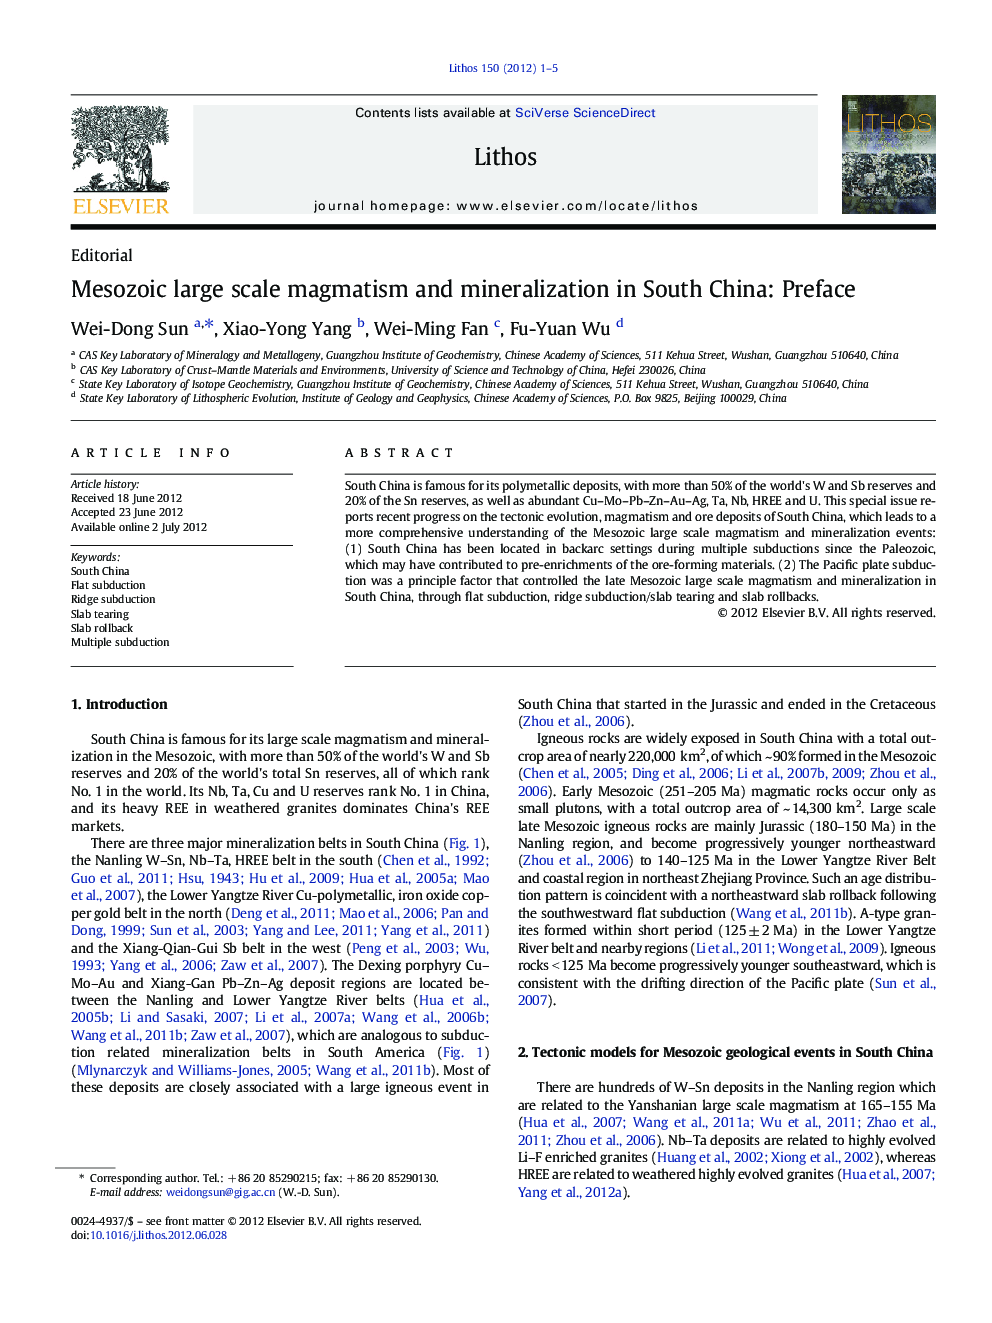 Mesozoic large scale magmatism and mineralization in South China: Preface